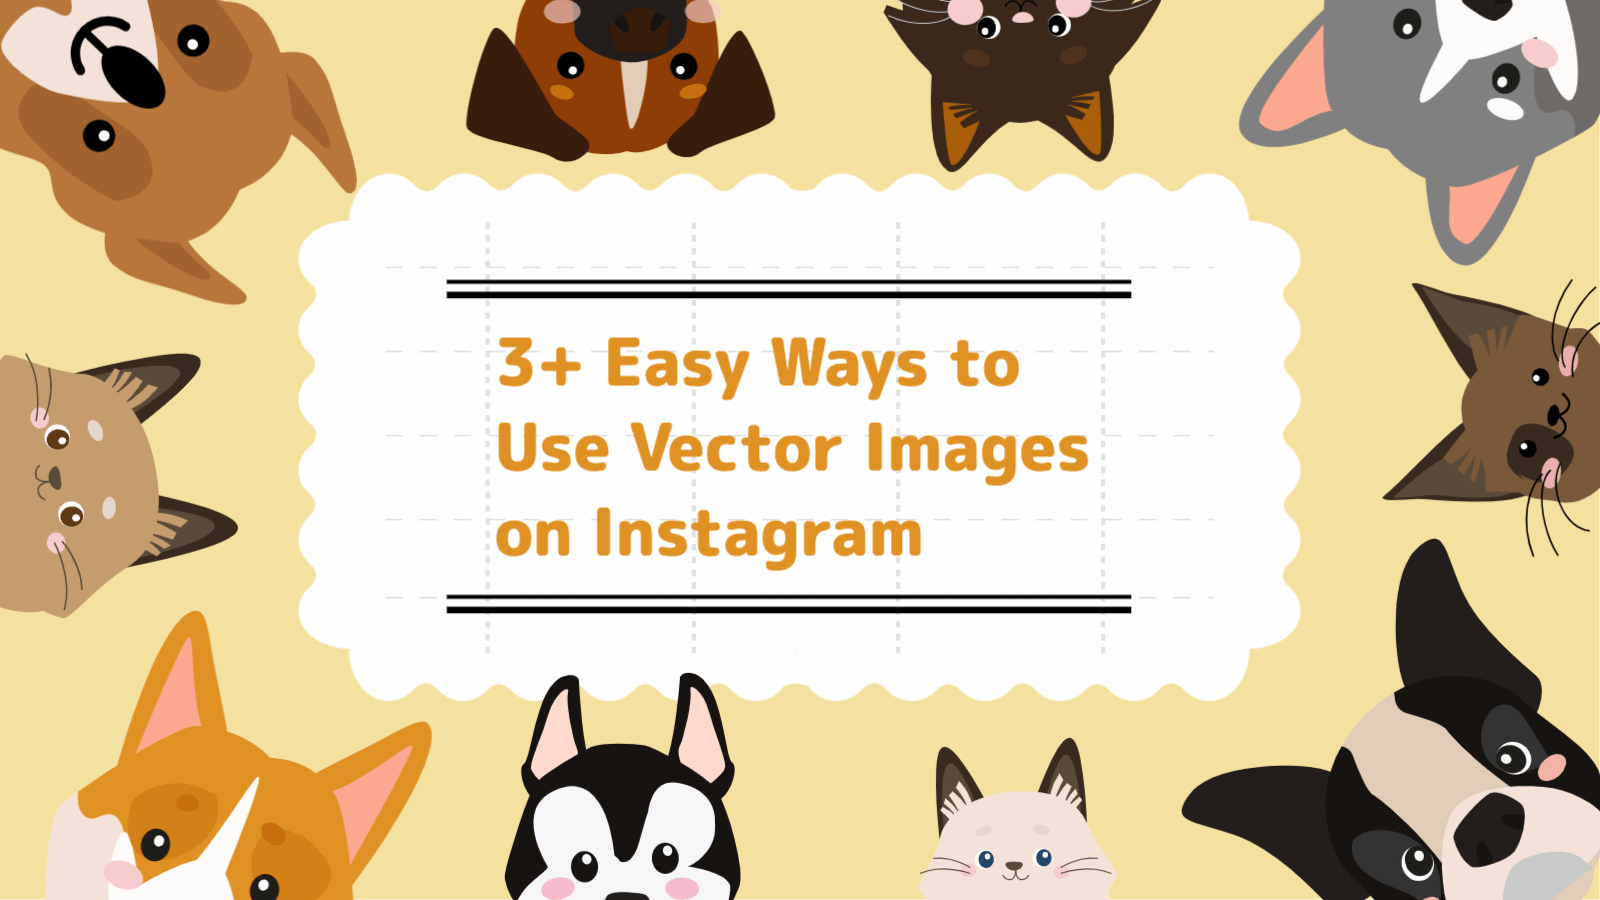 3+ Easy Ways to Use Vector Images on Instagram